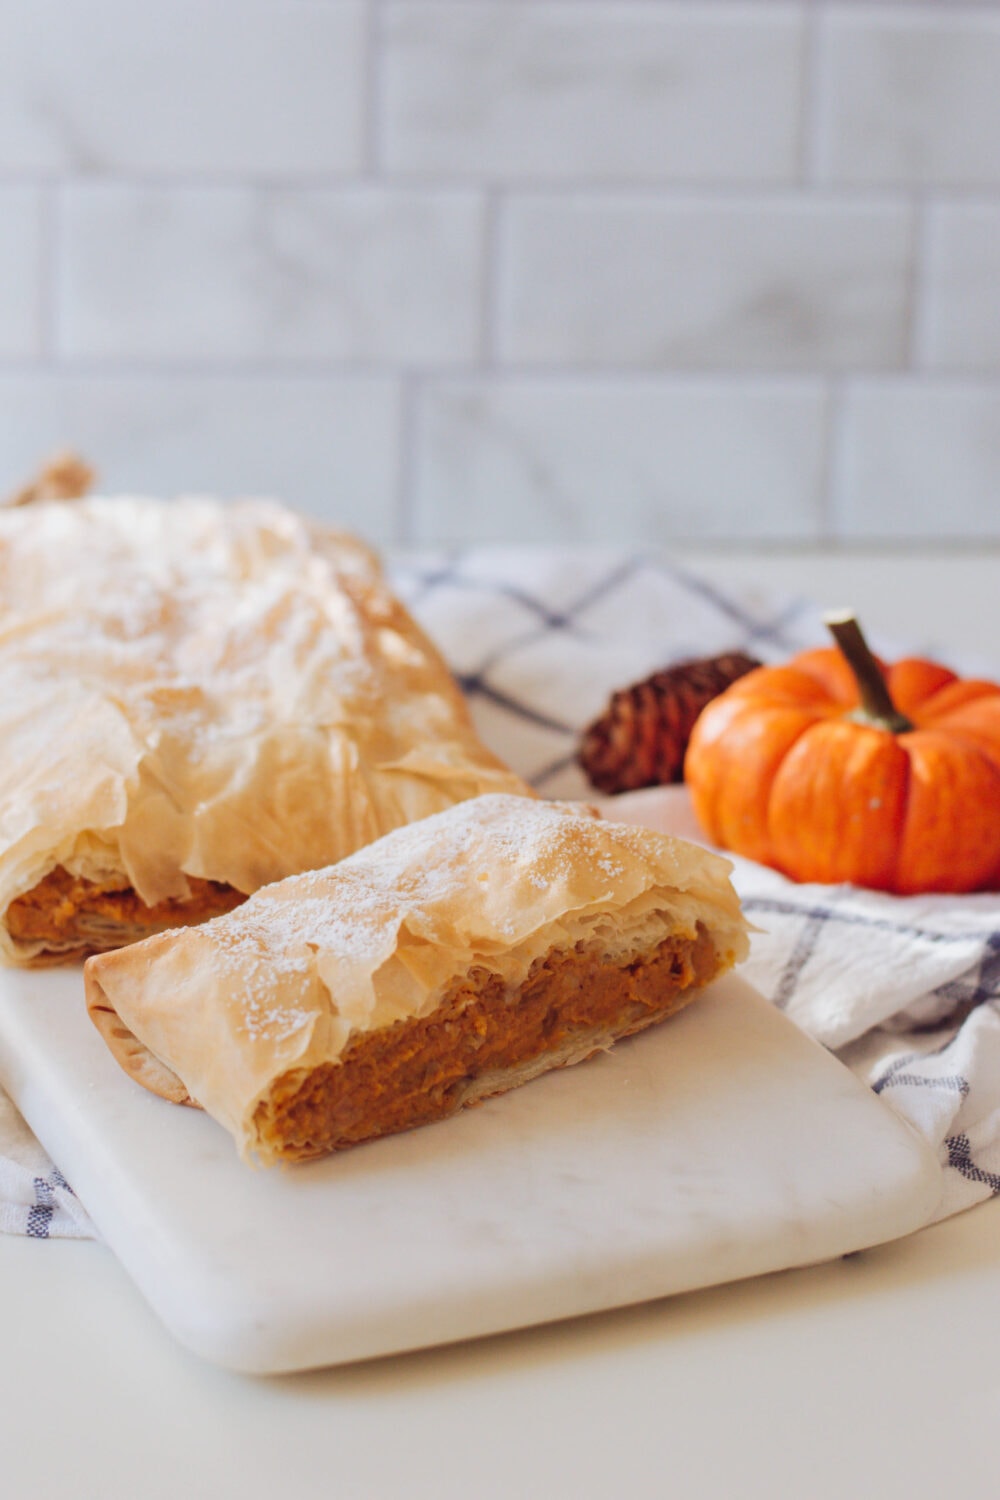 Let’s give ‘em PUMPKIN to talk about! This Pumpkin Pie Pastry is flaky, flavorful and so nostalgic of a classic pumpkin pie.